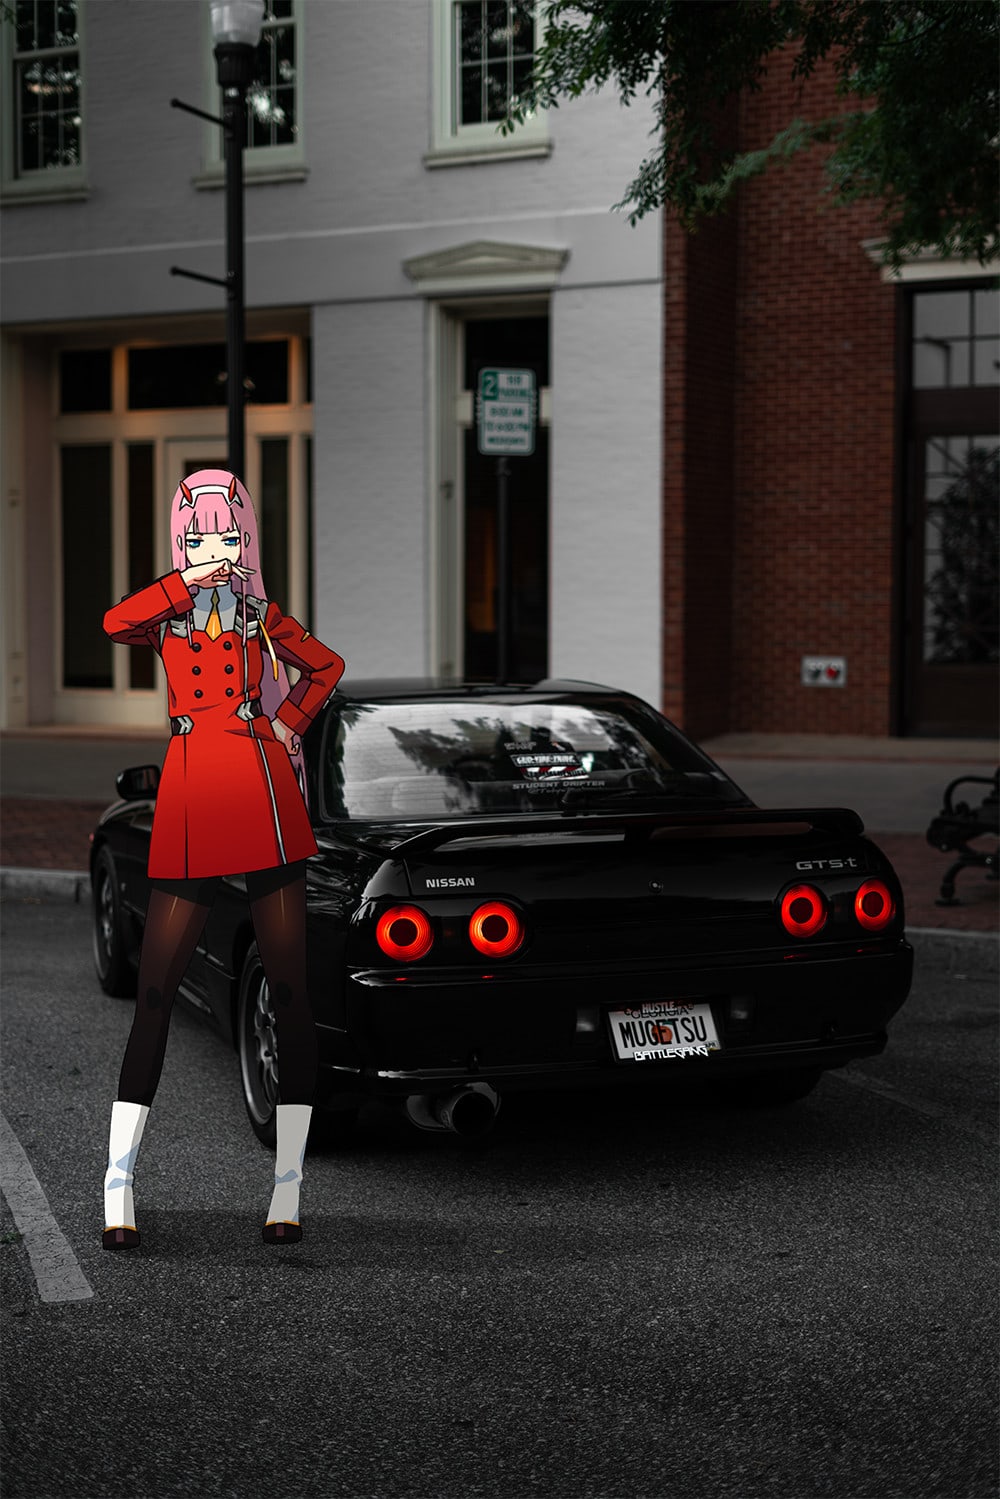 culture - When did people start putting anime characters on vehicles? -  Anime & Manga Stack Exchange